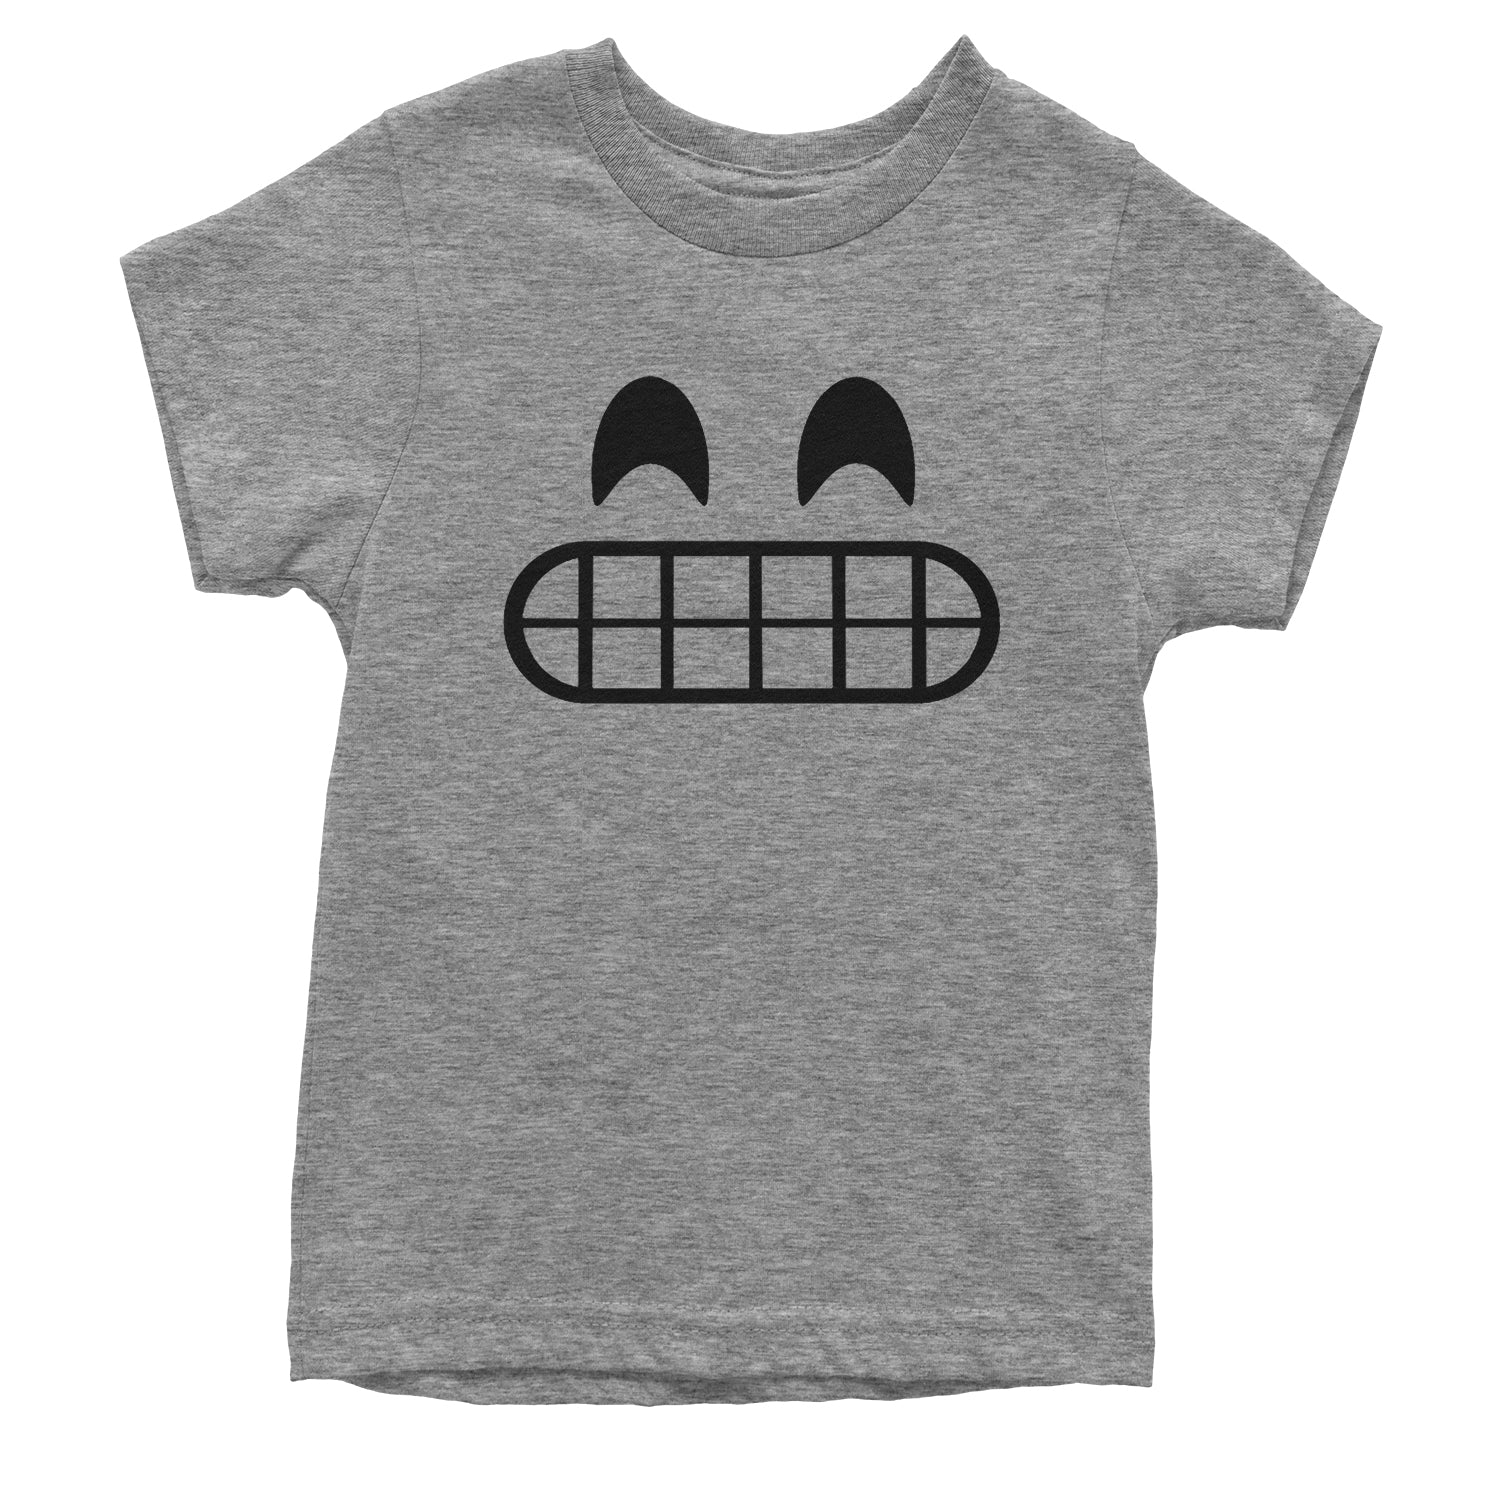 Emoticon Grinning Smile Face Youth T-shirt cosplay, costume, dress, emoji, emote, face, halloween, smiley, up, yellow by Expression Tees